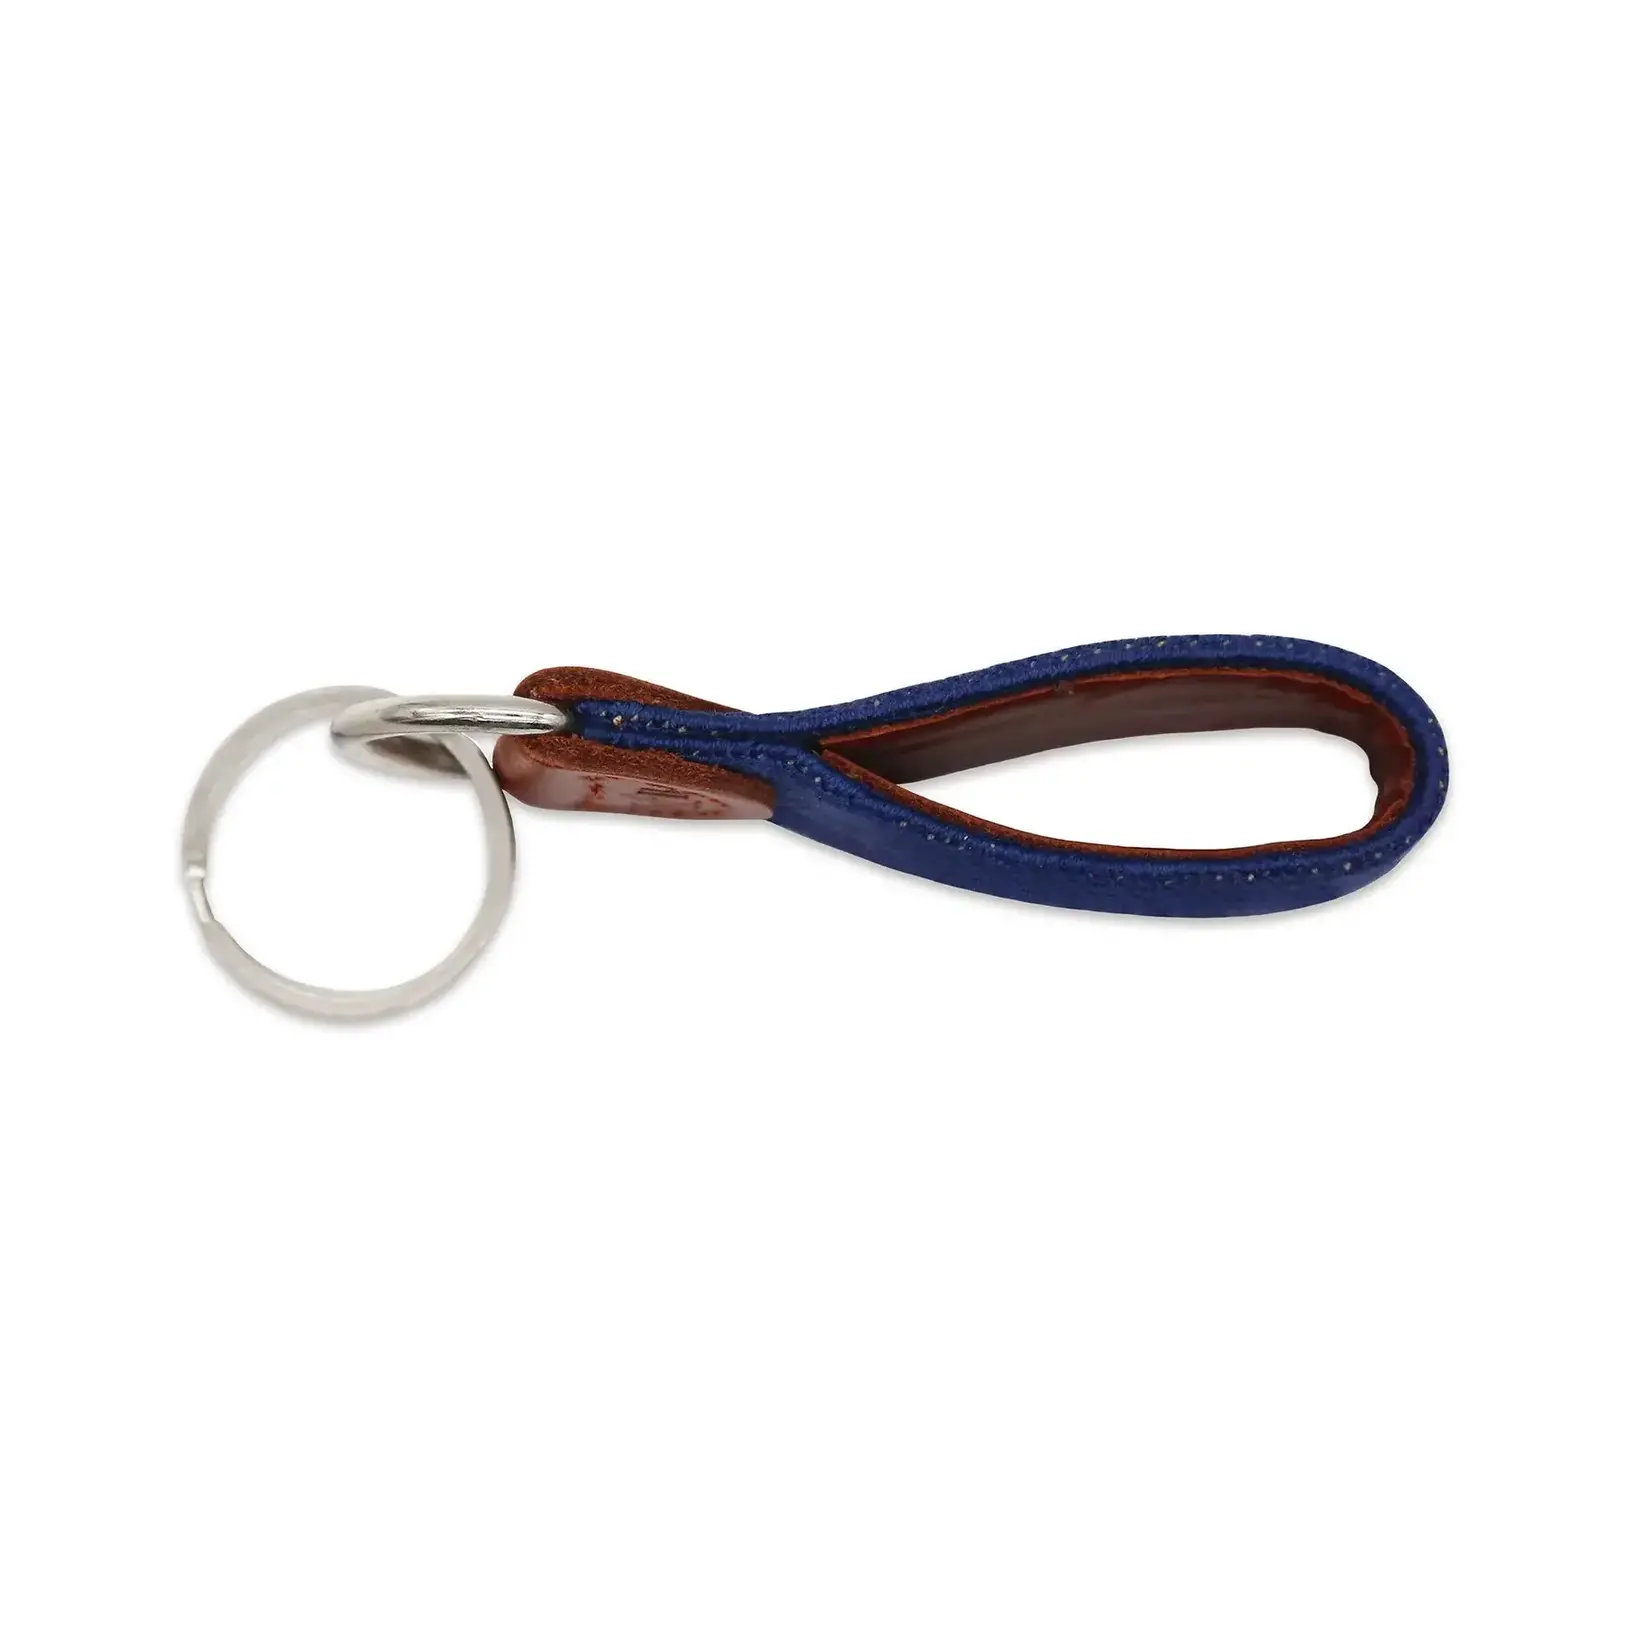 Smathers & Branson Smathers and Branson Fishing Fly Key Fob